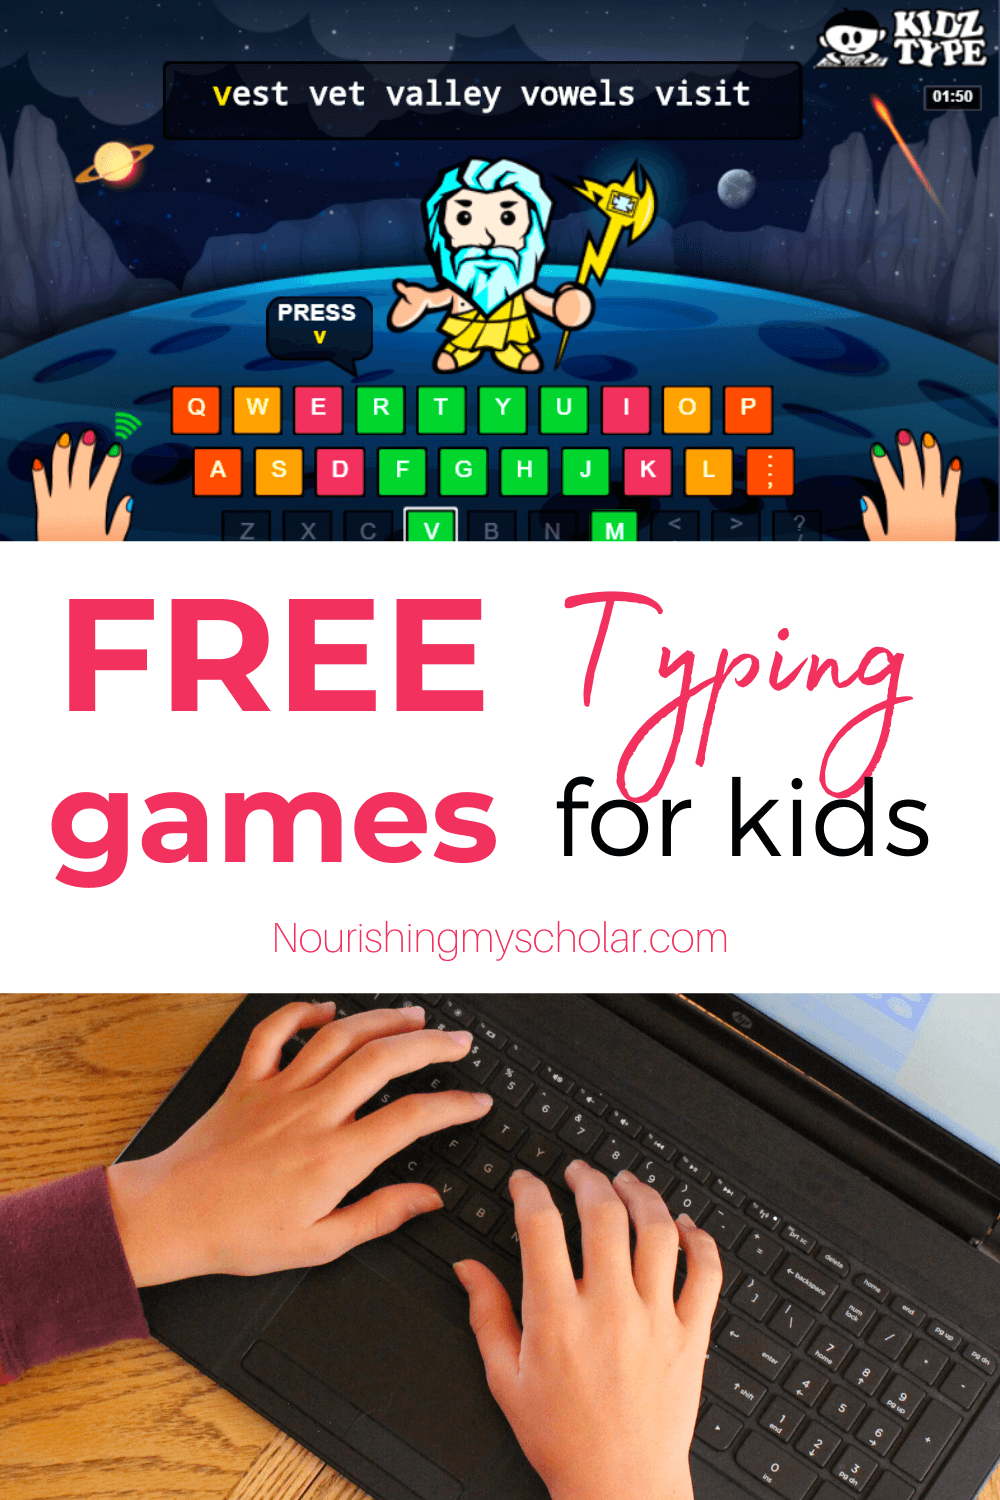 Free Typing Games for Kids: Free typing games and practice make learning touch typing fun and easy for your kids! Check out these games for all skill levels! #freetyping #freetypinggames #freetypinggamesforkids #kidstypinggames #typingpracticegames #typingforkids #typinggamesforkids #KidzType #homeschool 